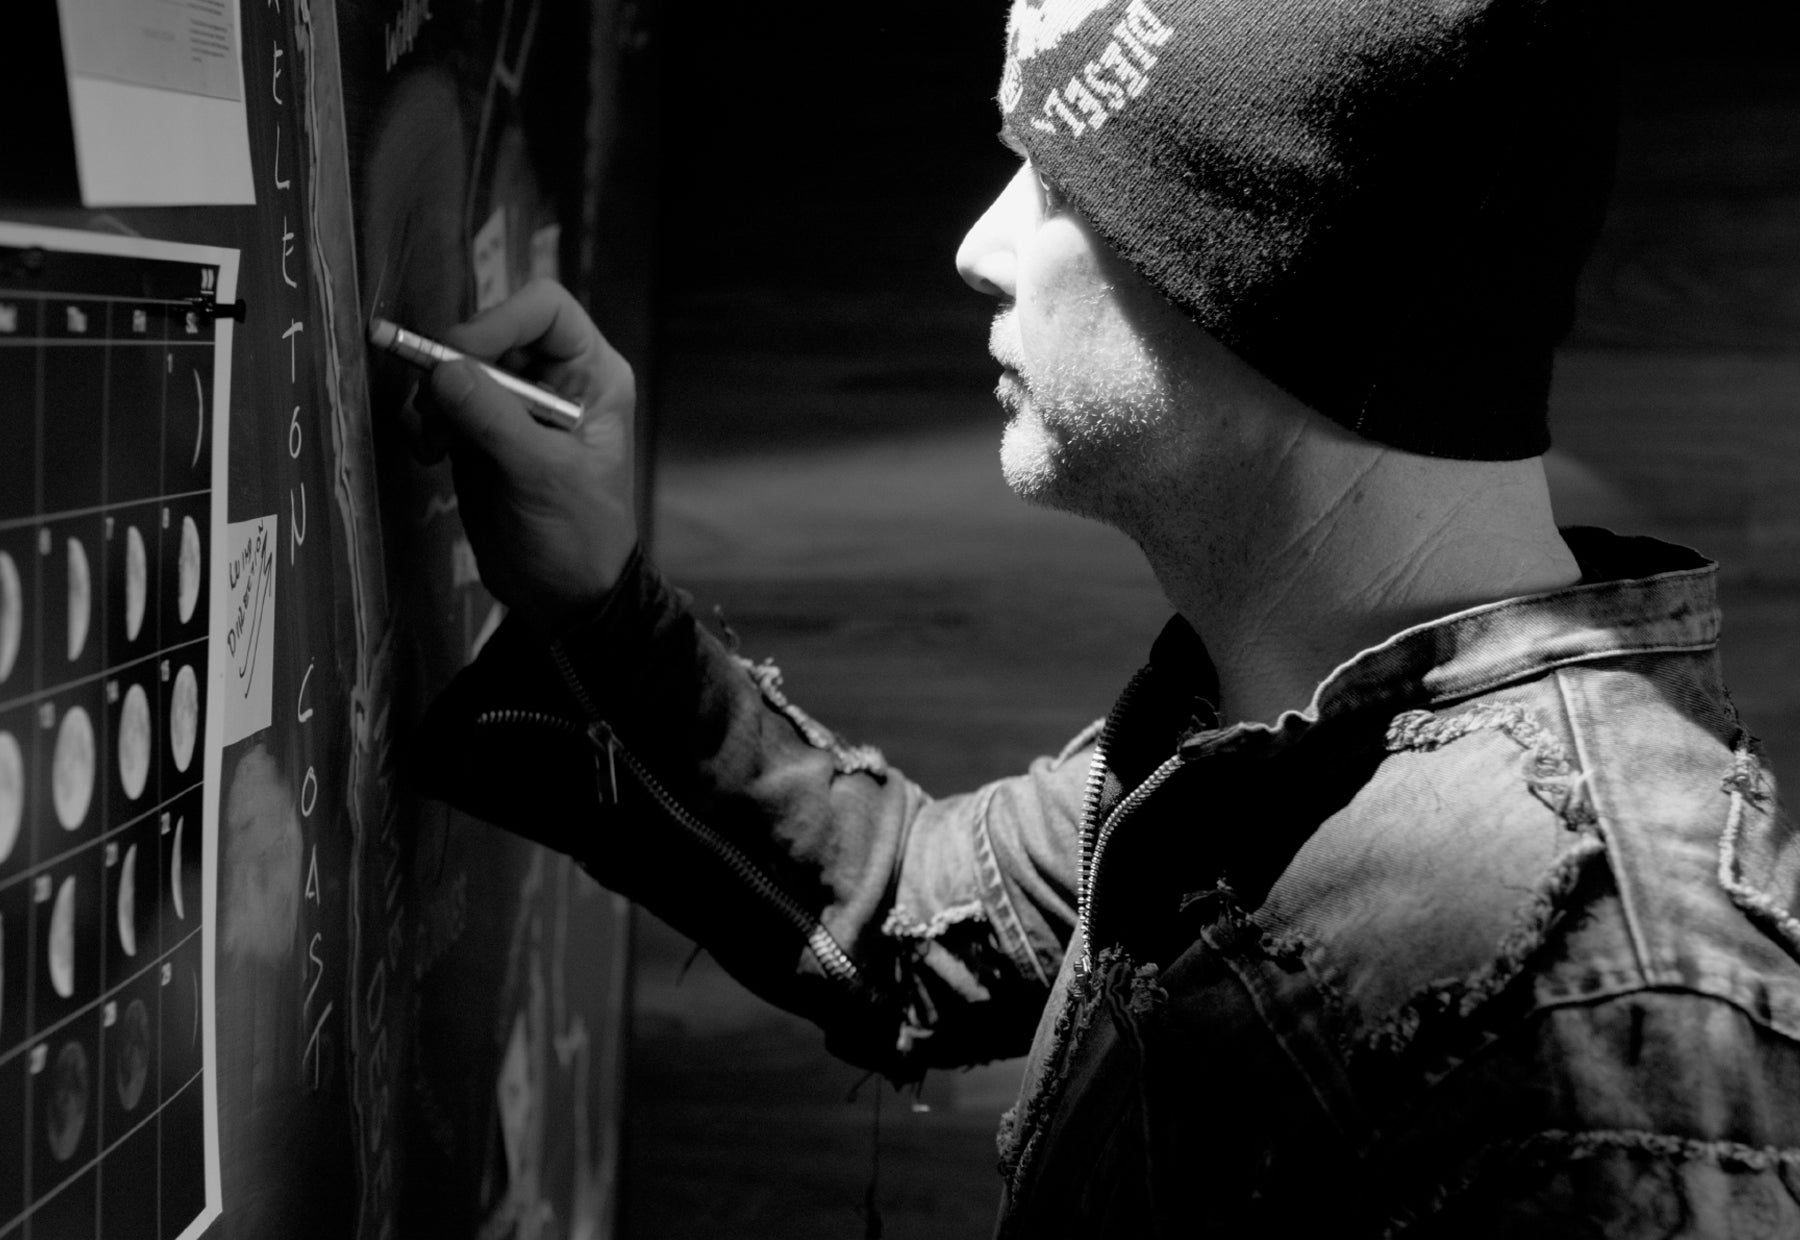 Backlit black and white portrait of Peter Lik wearing a black leather jacket and beanie writing notes on a chalkboard as he researches new locations to photograph